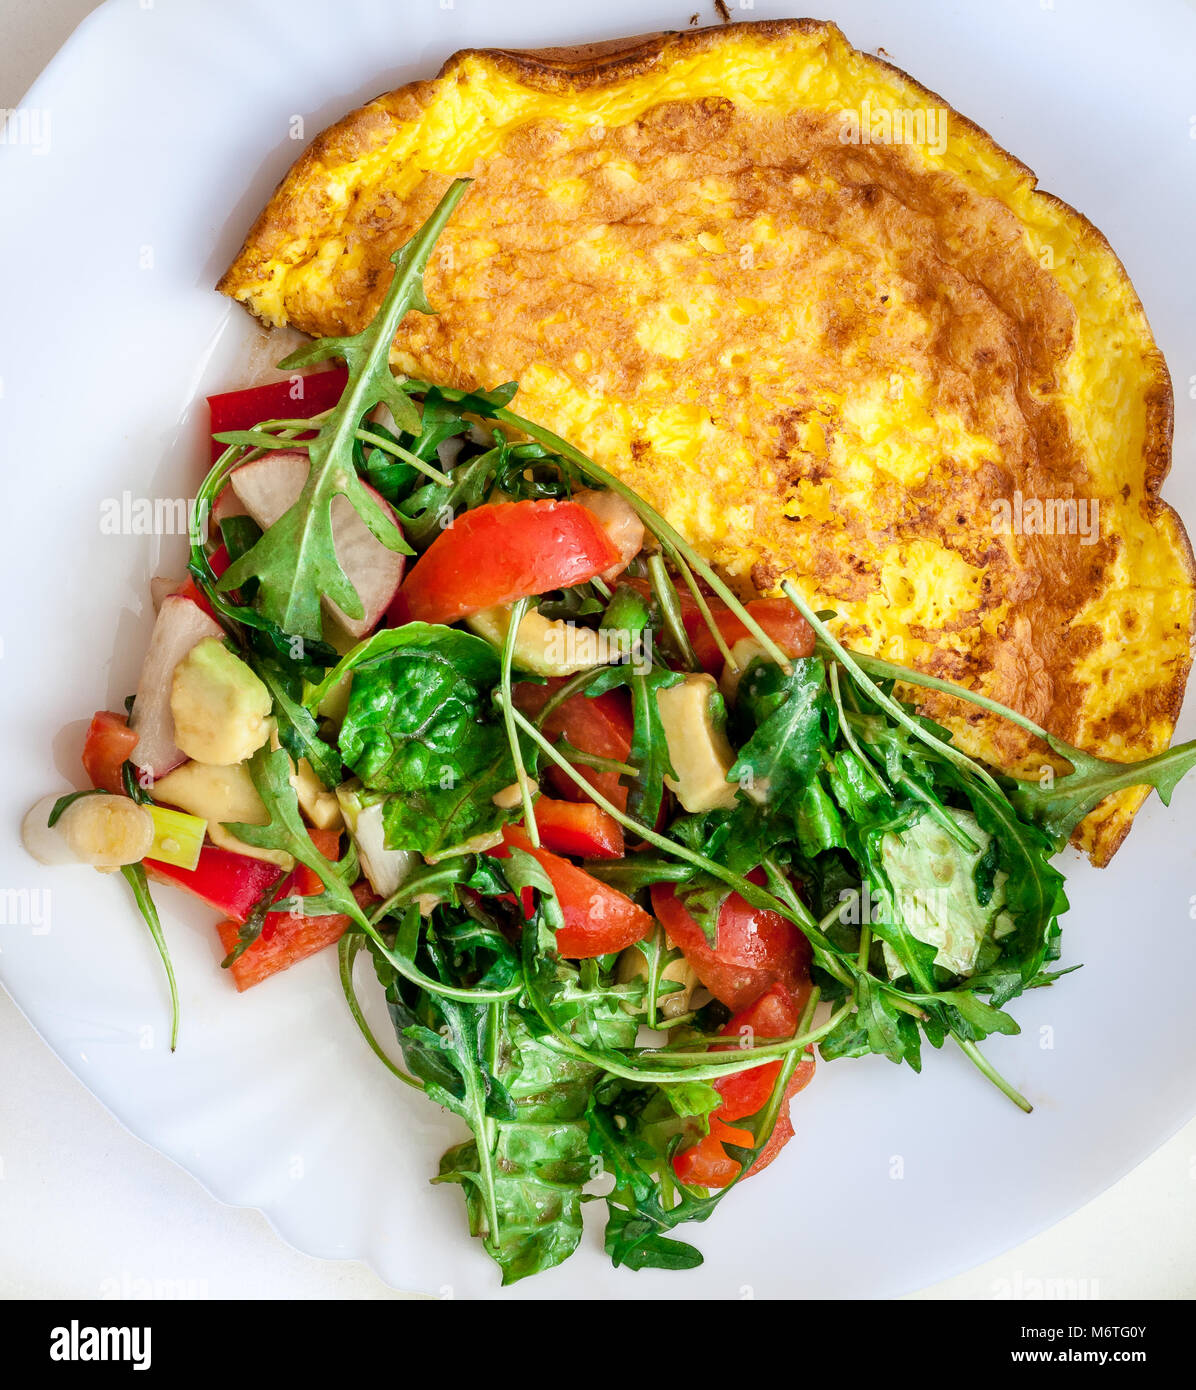 Home made omlette with cheese tomato and rucola salad. Breakfast, morning. Stock Photo